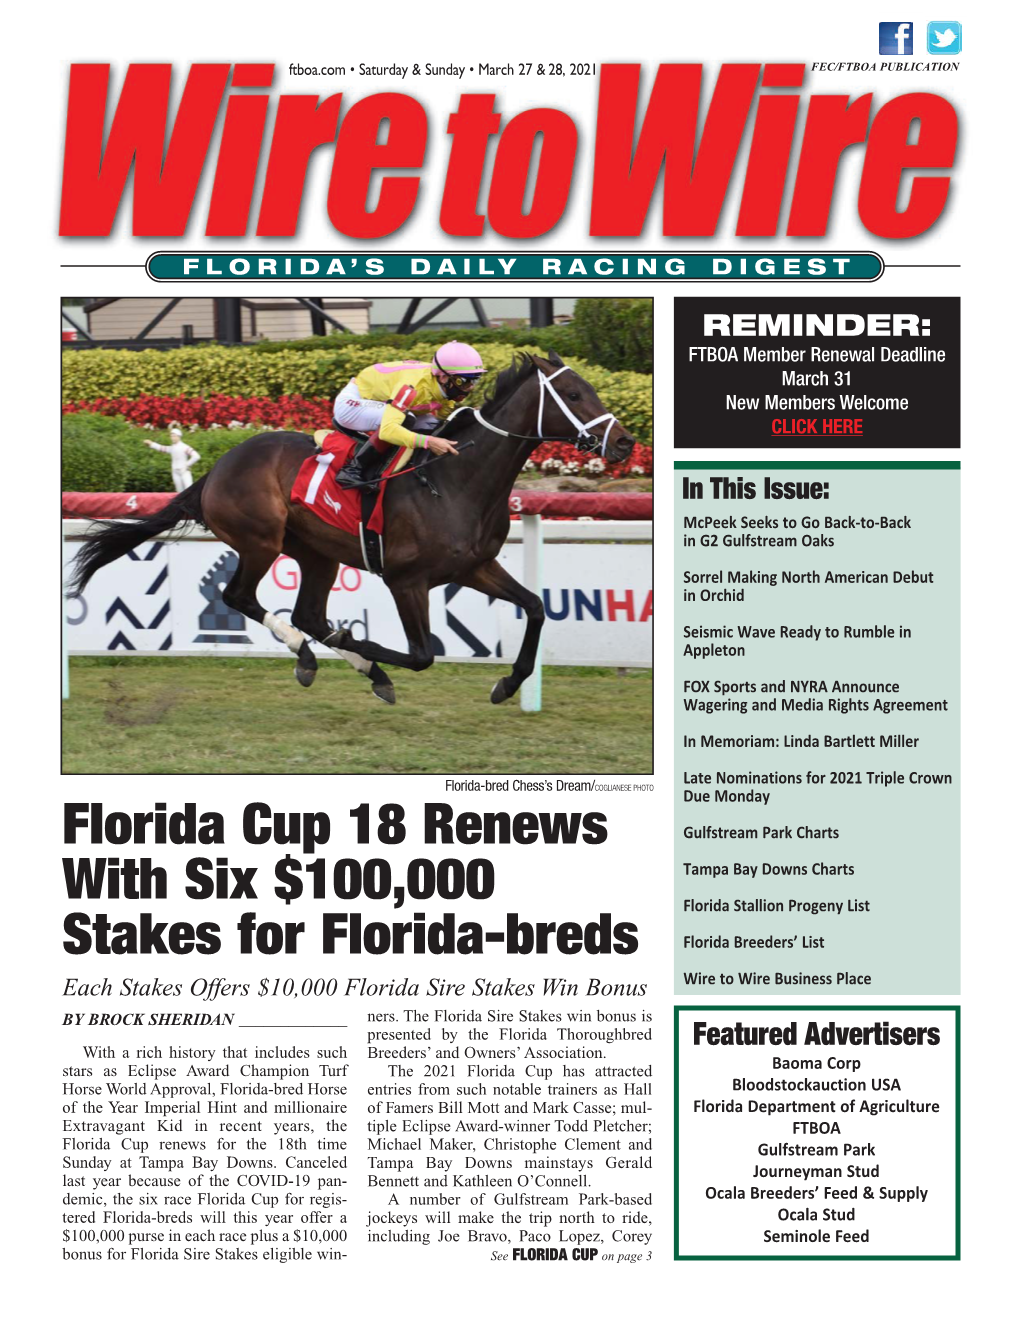 Florida Cup 18 Renews with Six $100,000 Stakes for Florida-Breds